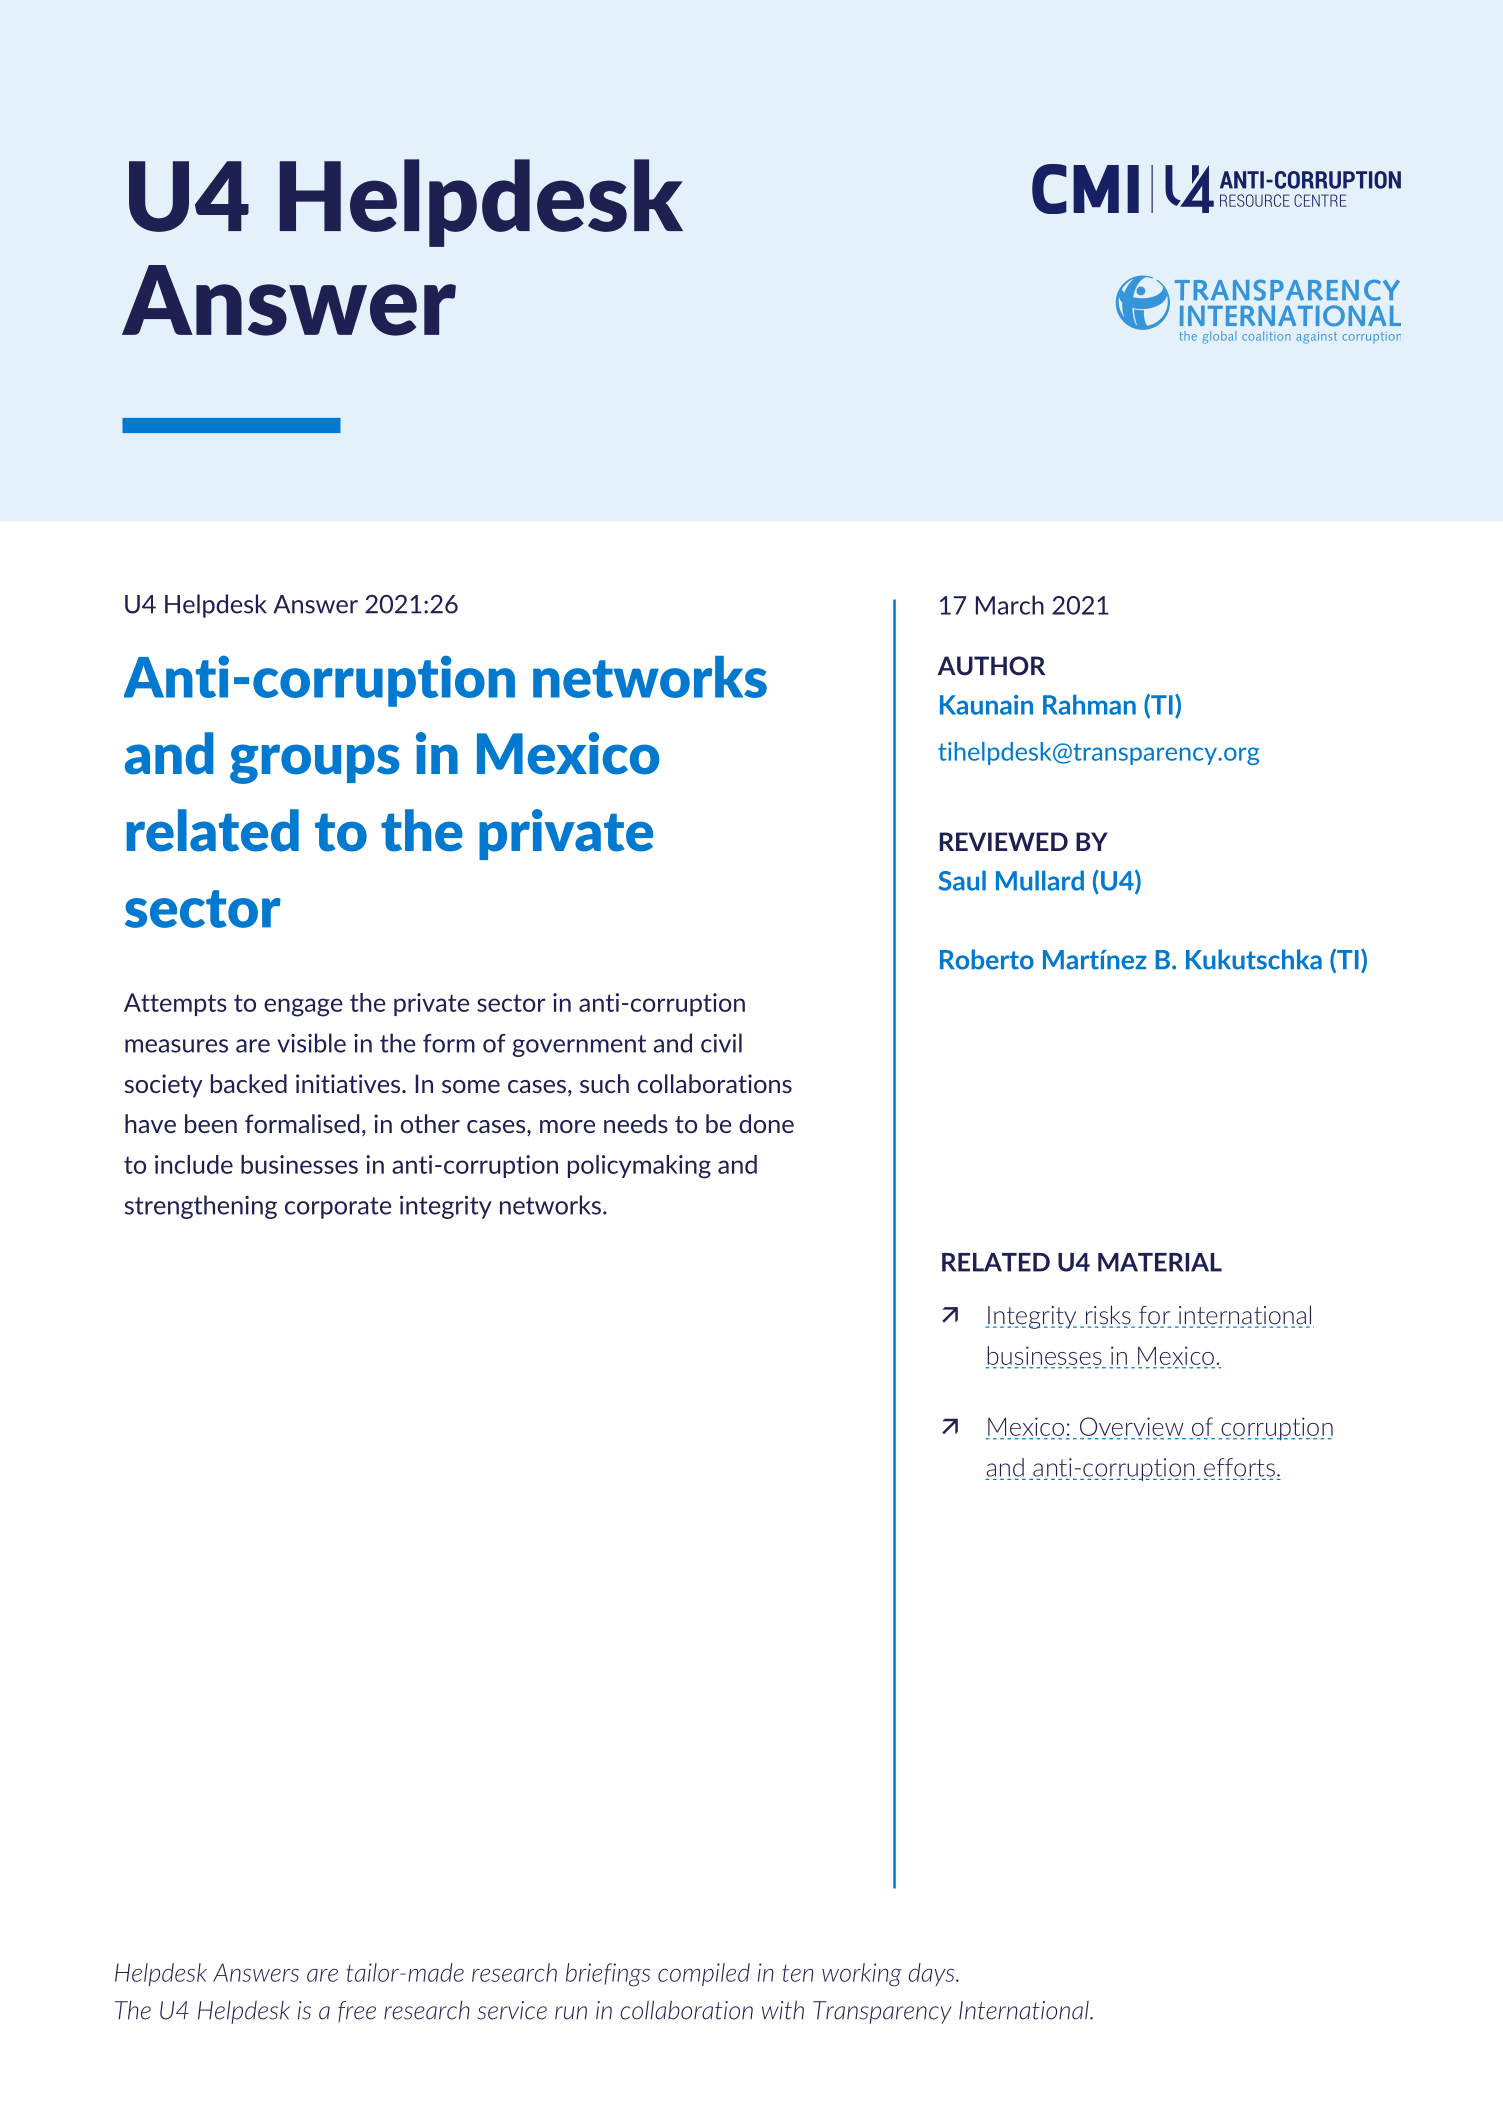 Anti-corruption networks and groups in Mexico related to the private sector 